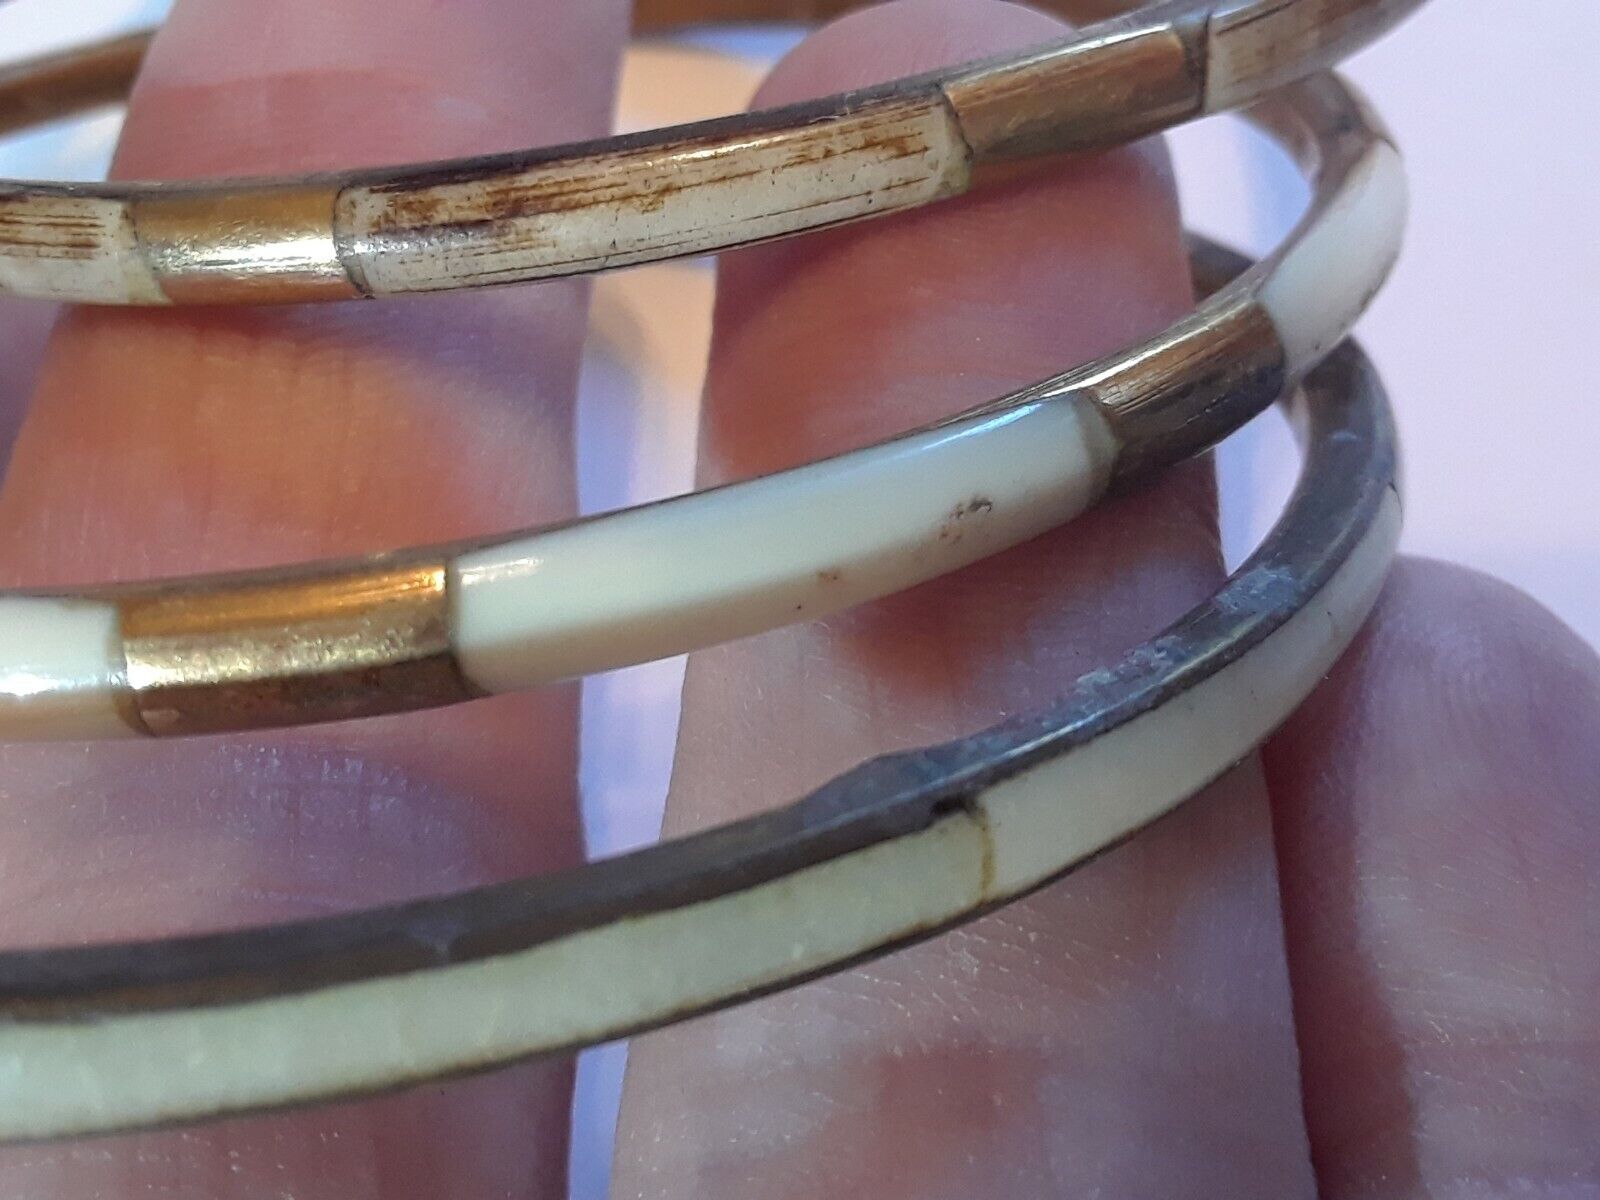 Lot of 5 gold tone bangle bracelets with inlay stone. Made in India. Beautiful! Unbranded - фотография #12